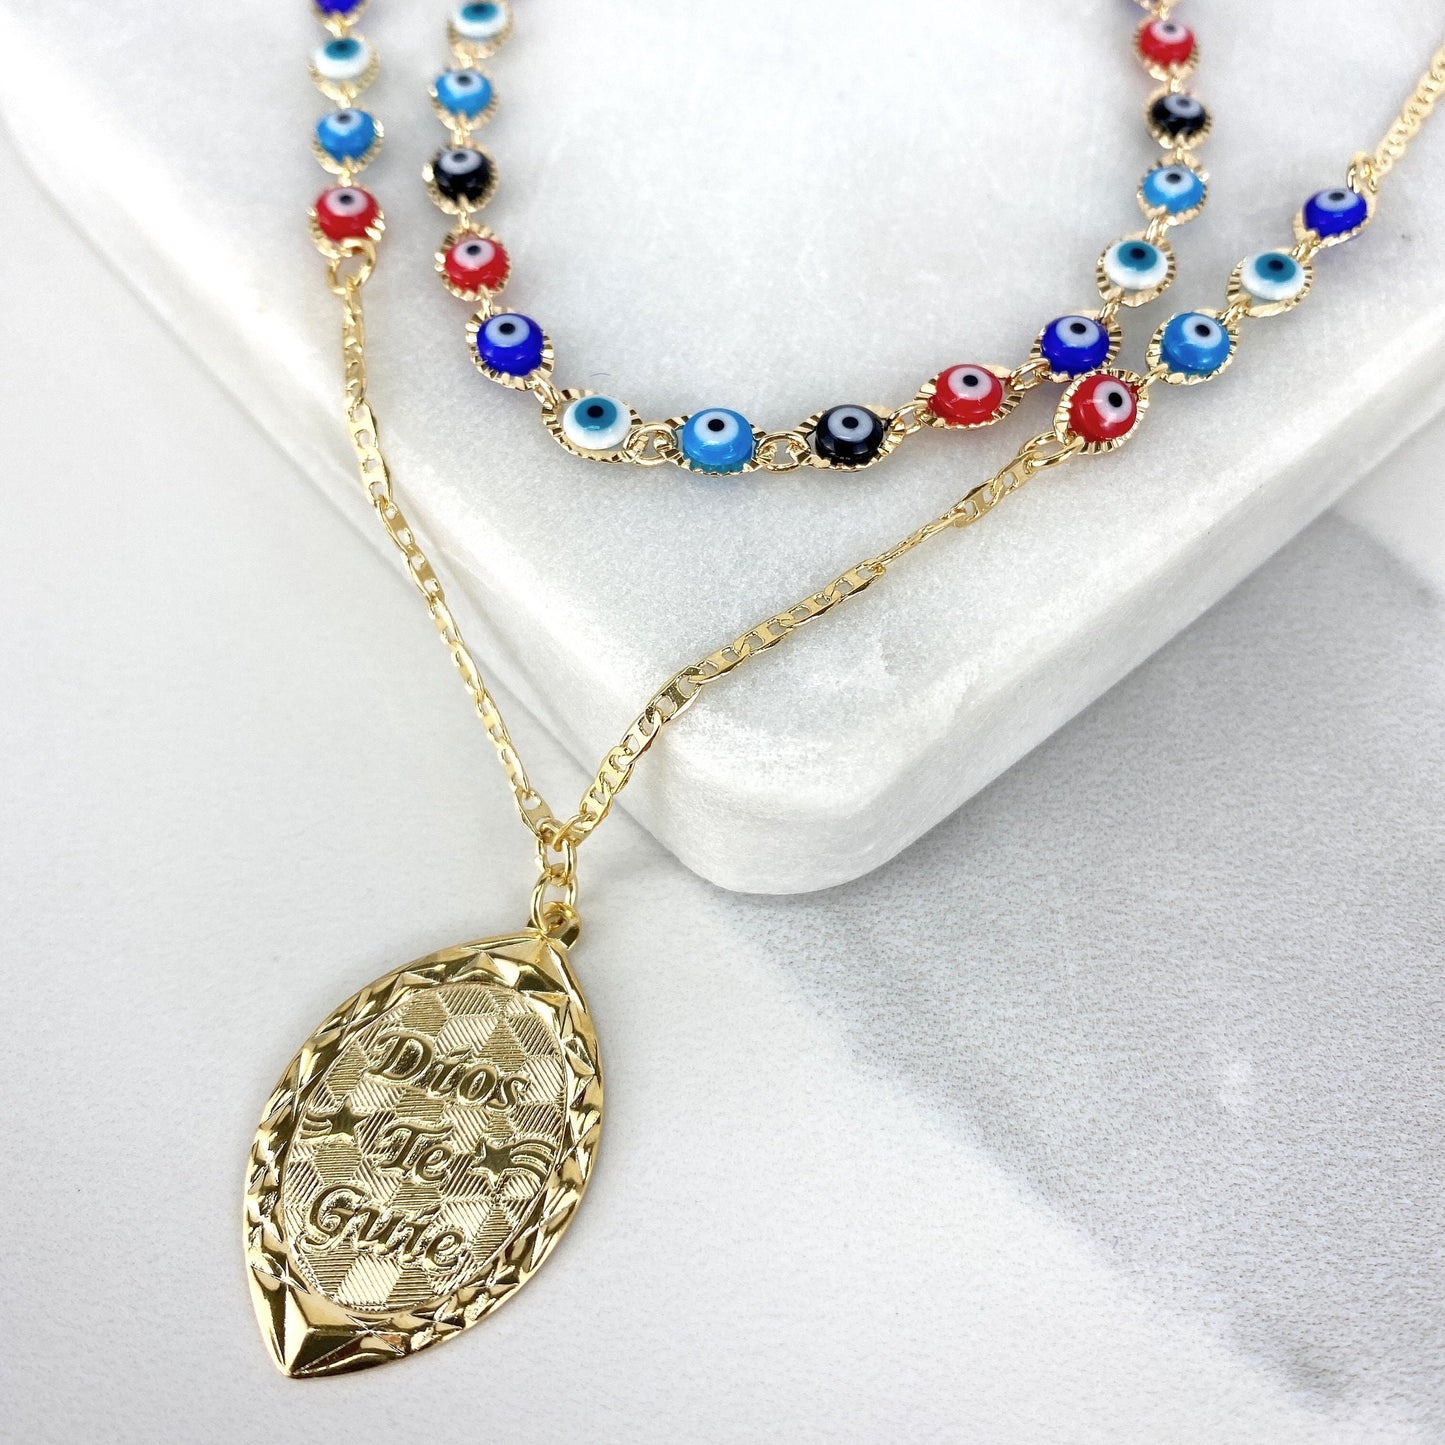 18k Gold Filled Fancy  Greek Eyes, Mariner Link Chain Dios Te Guie Necklace For Wholesale and Jewelry Supplies